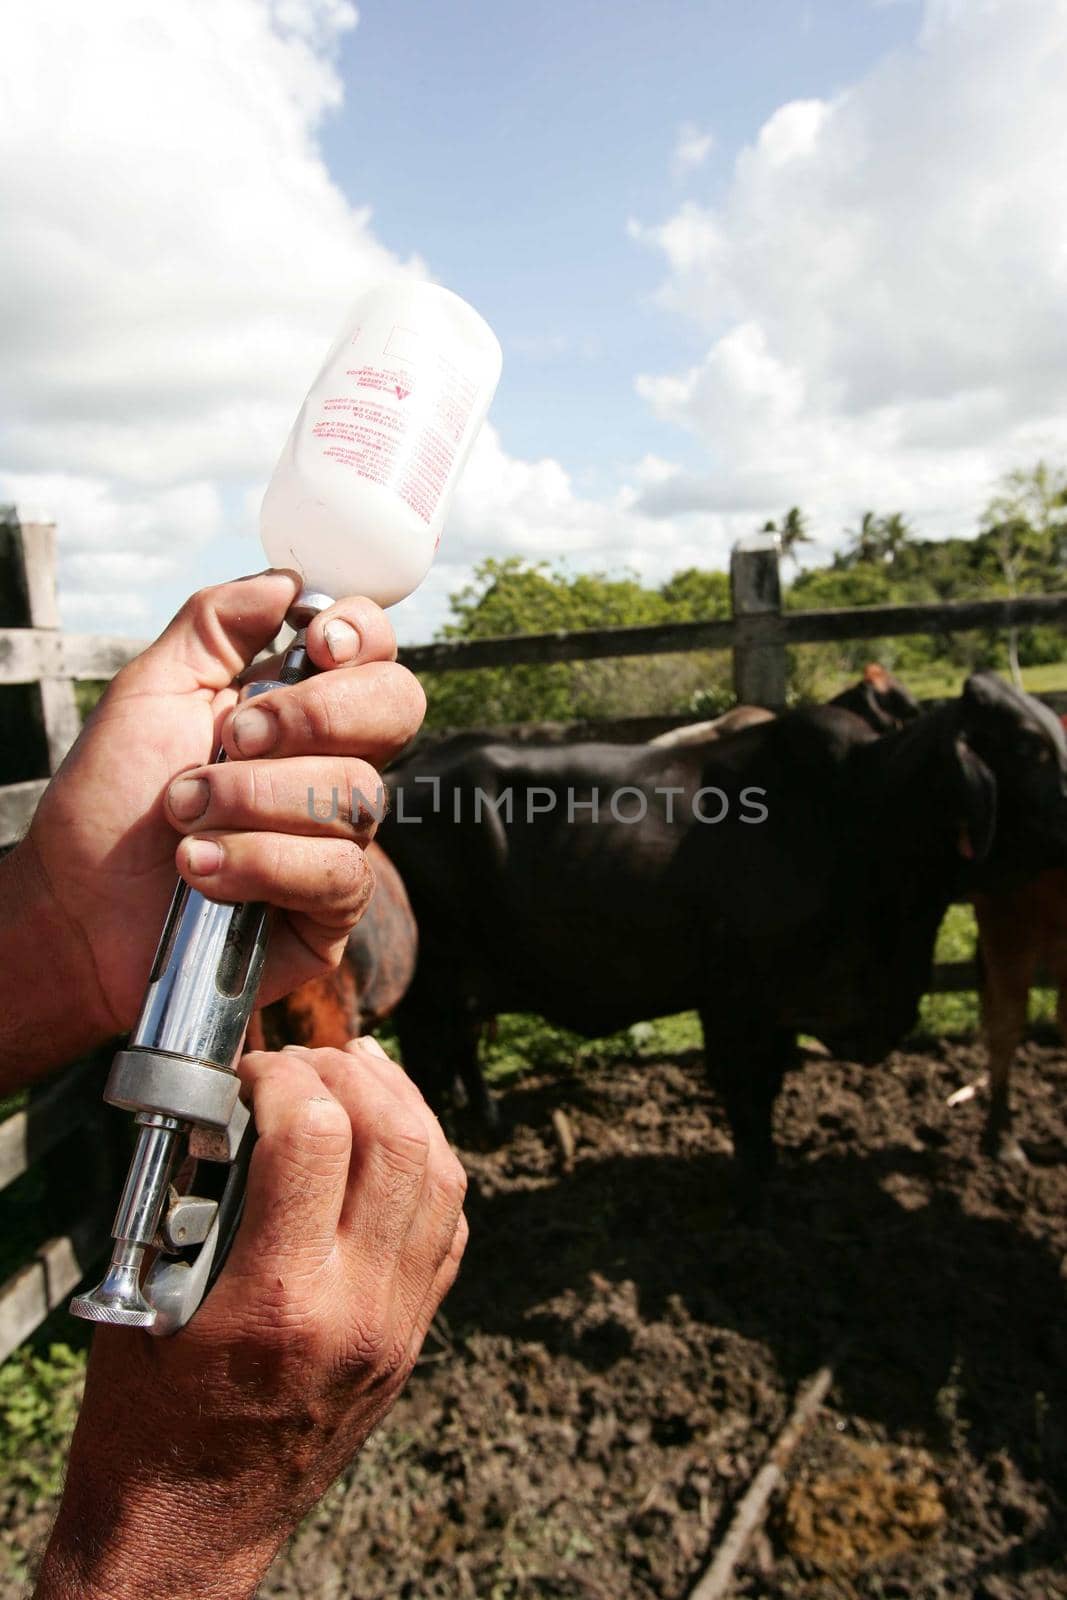 eunapolis, bahia, brazil - november 11, 2009: FMD vaccination in cattle on a farm in the city of Eunapolis.
